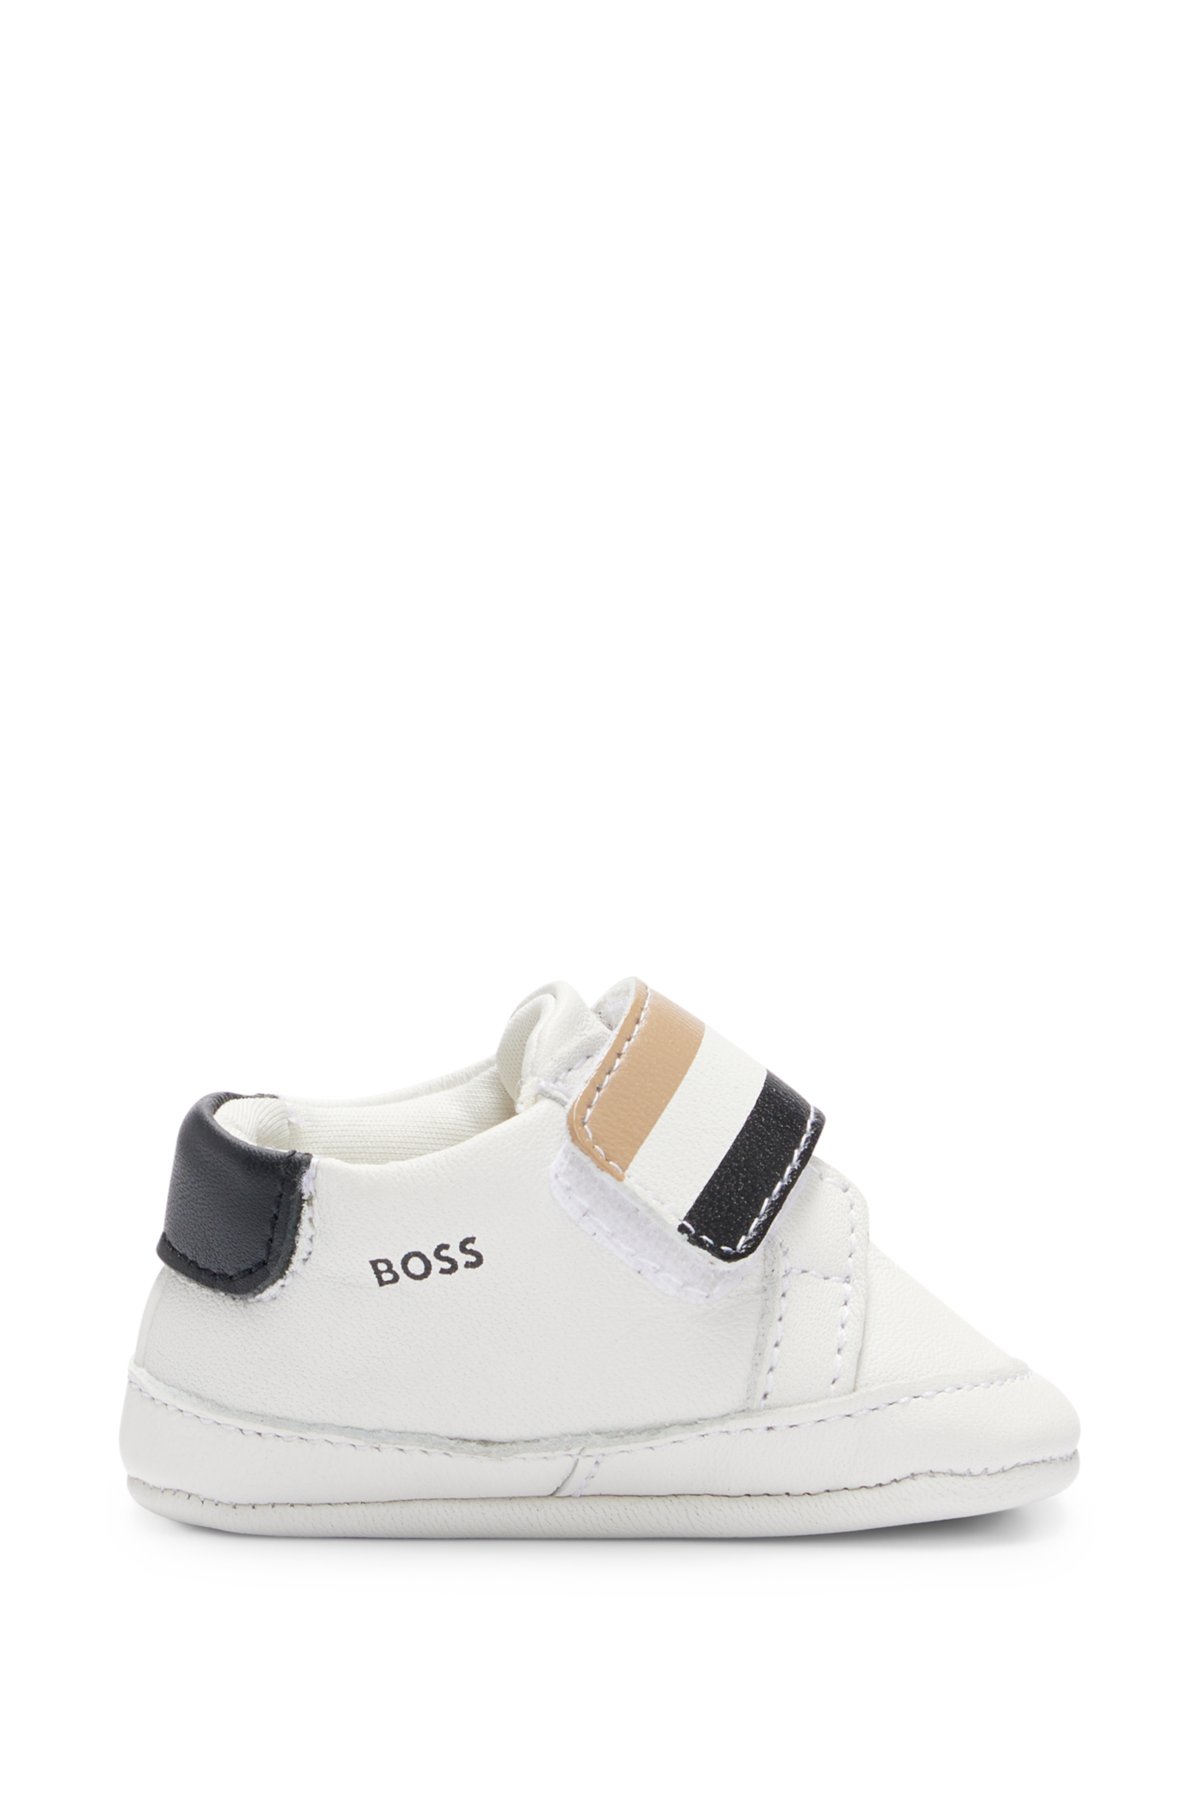 Med andre band galning Windswept BOSS - Gift-boxed leather trainers for babies